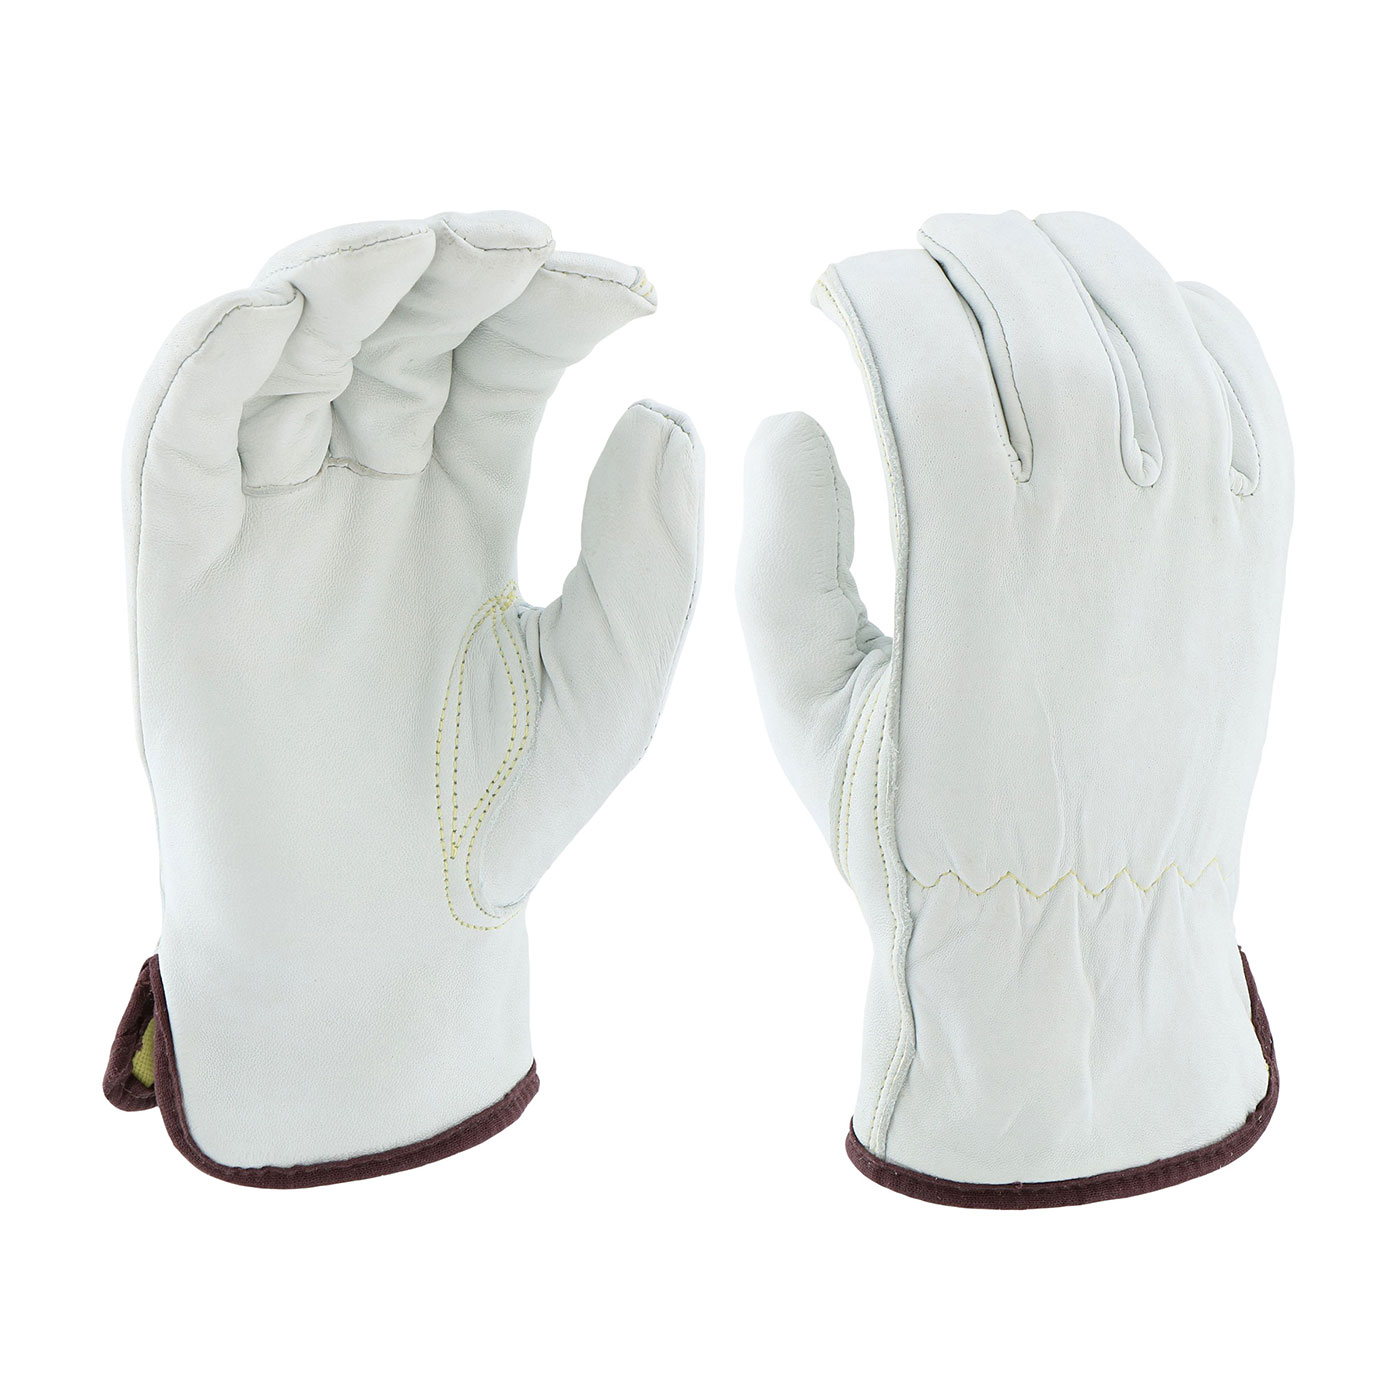 PIP® 9110/3XL Standard Grade Cut-Resistant Gloves, 3XL, Sheep Grain Leather, Slip-On Cuff, Resists: Abrasion, Cut, Puncture and Tear, ANSI Cut-Resistance Level: A4, Paired Hand